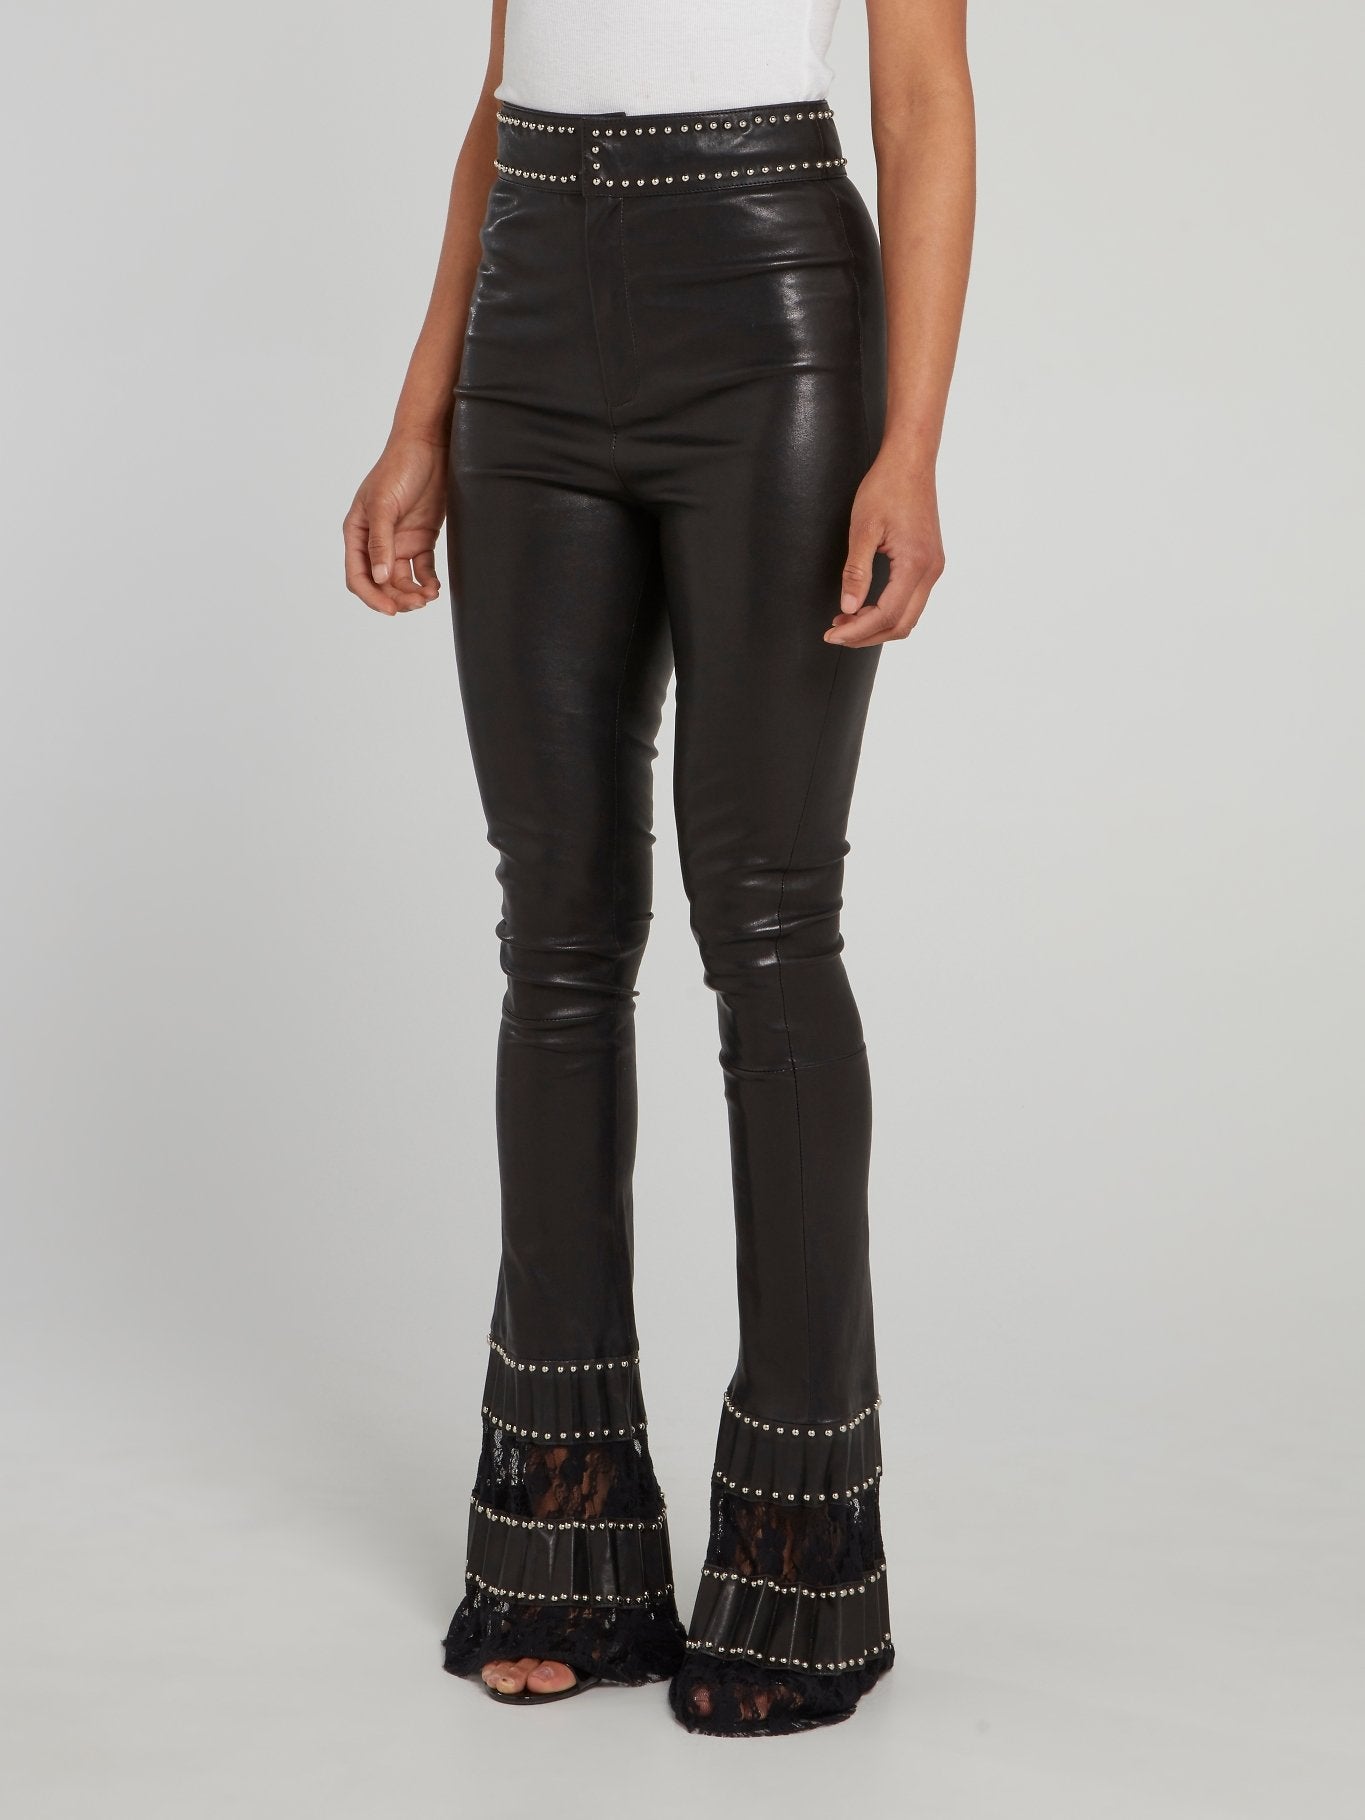 Black Embellished Lace Panel Flared Leather Trousers